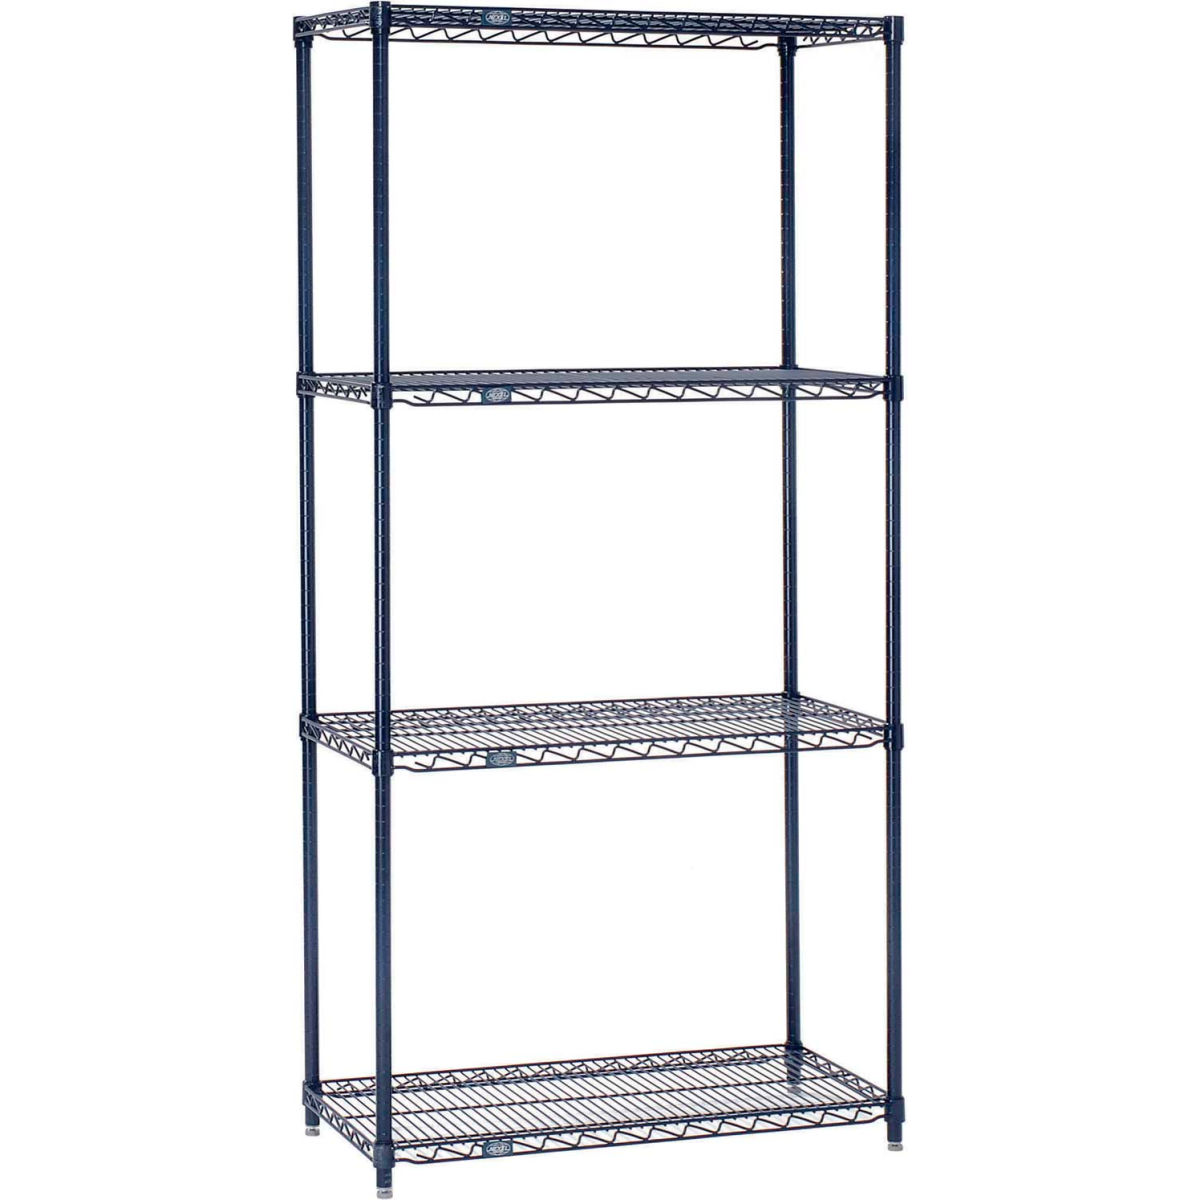 Picture of Global Industrial 14485N 54 x 48 x 14 in. Nexelon Blue Epoxy Starter Wire Shelving